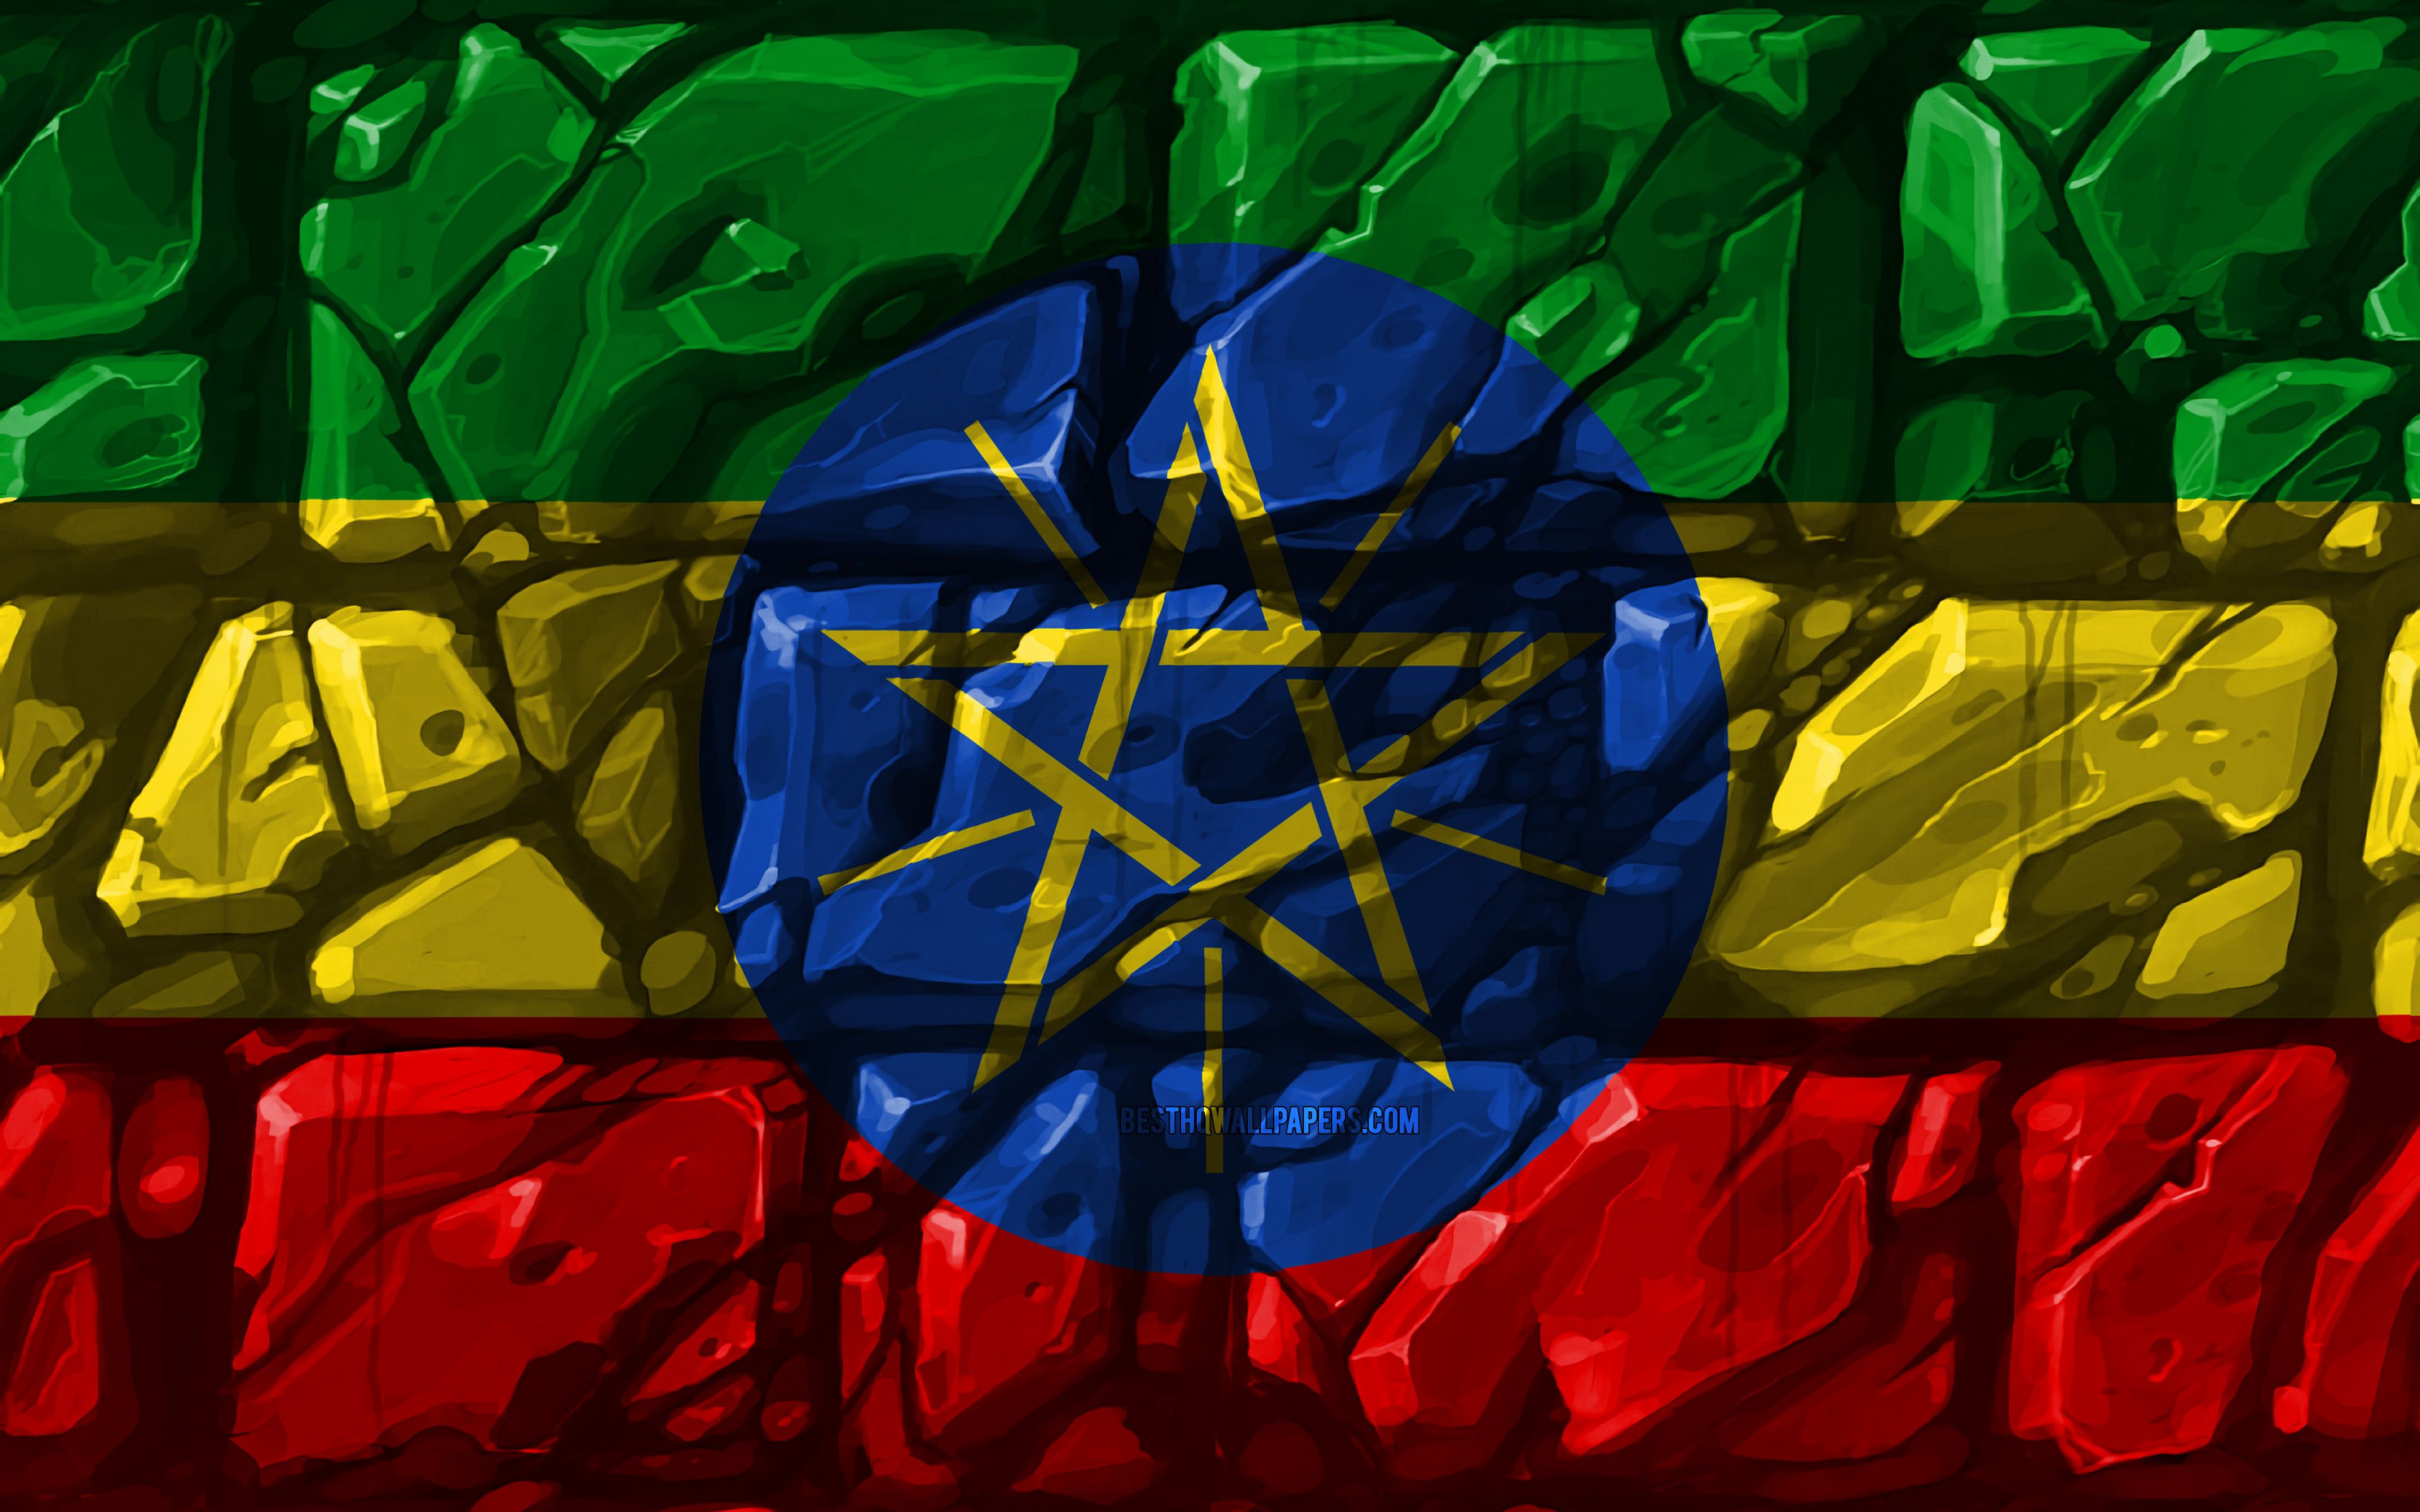 Download wallpaper Ethiopian flag, brickwall, 4k, African countries, national symbols, Flag of Ethiopia, creative, Ethiopia, Africa, Ethiopia 3D flag for desktop with resolution 3840x2400. High Quality HD picture wallpaper